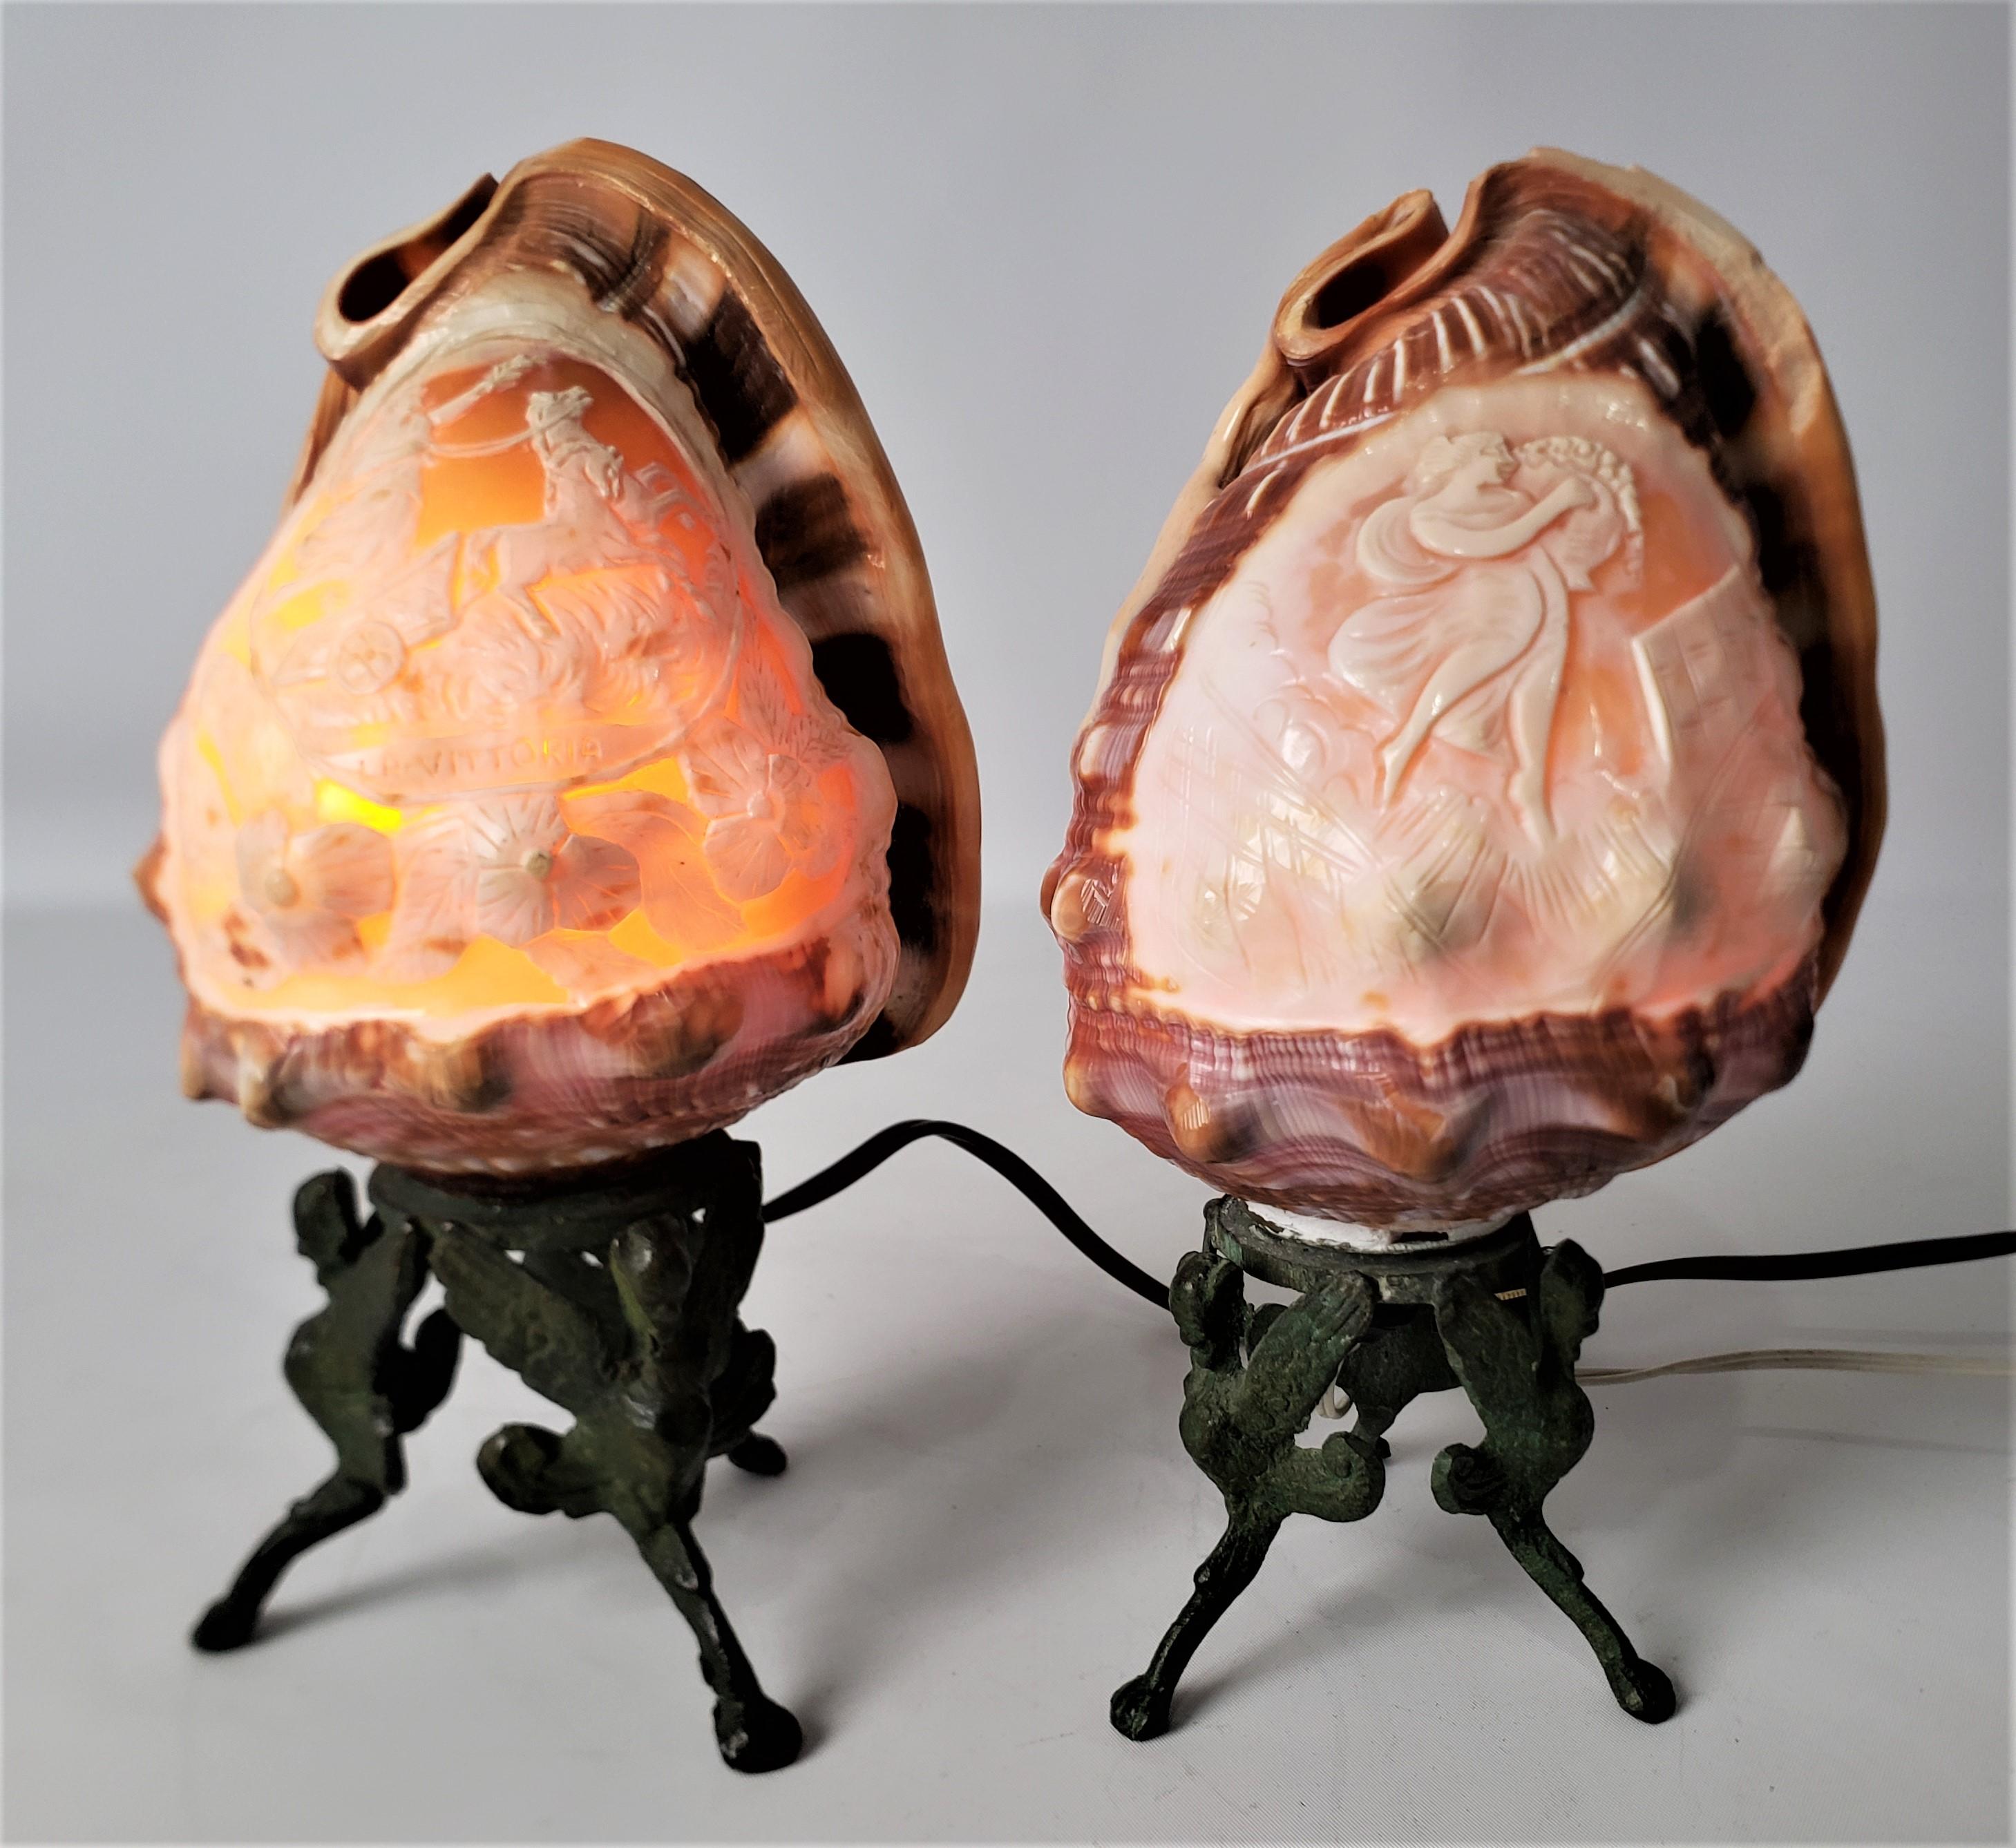 These antique carved shell accent lamps are unsigned, but presumed to have originated from Italy and dating to approximately 1920 and done in a Renaissance Revival style. The lights are natural conch style shells which have been elaborately